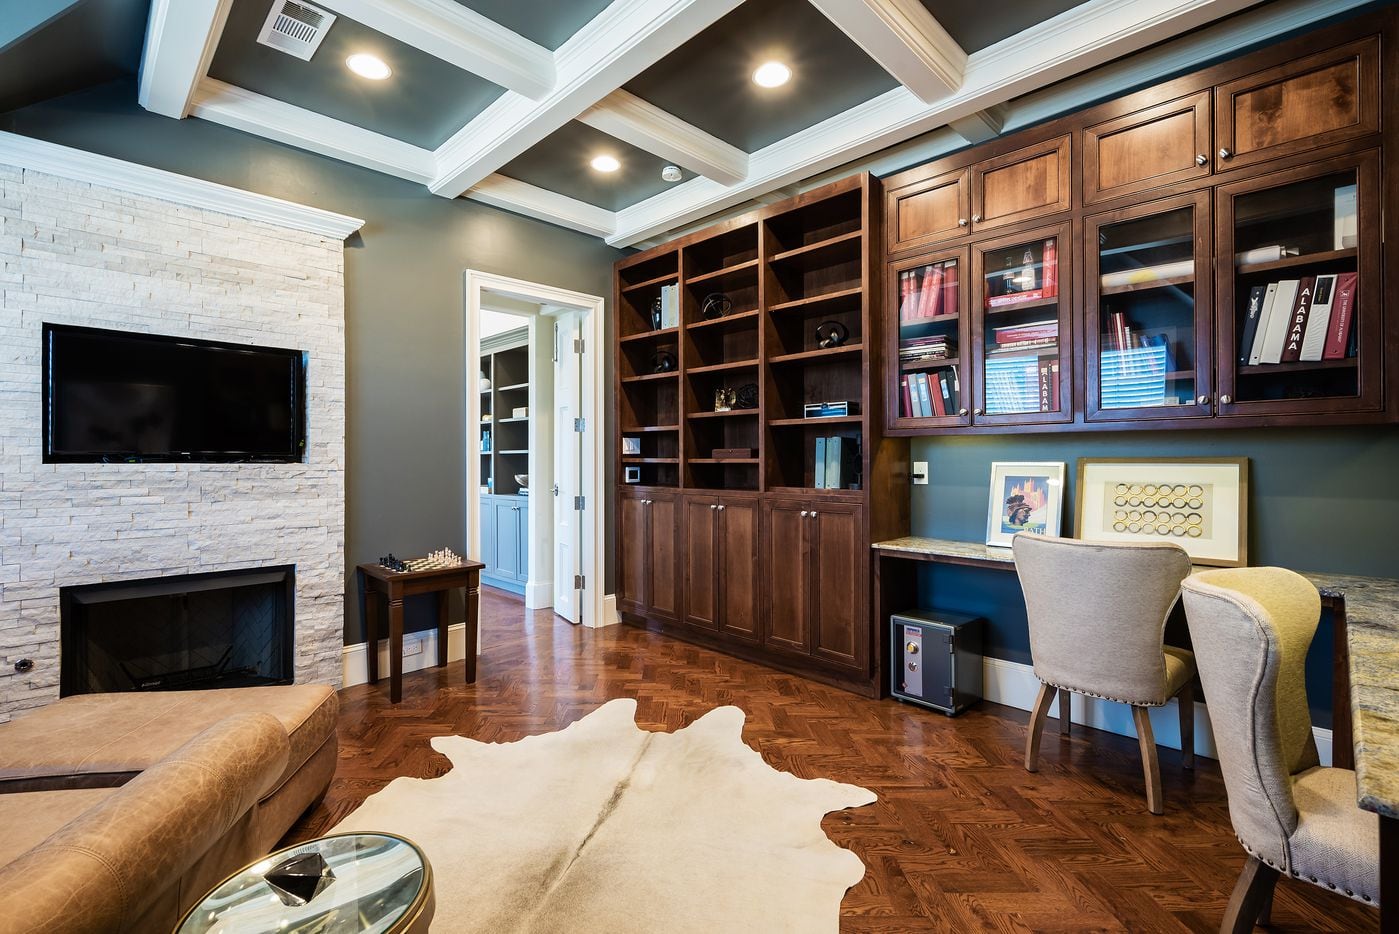 Take a look at the home at 10405 Somerton Drive in Dallas.